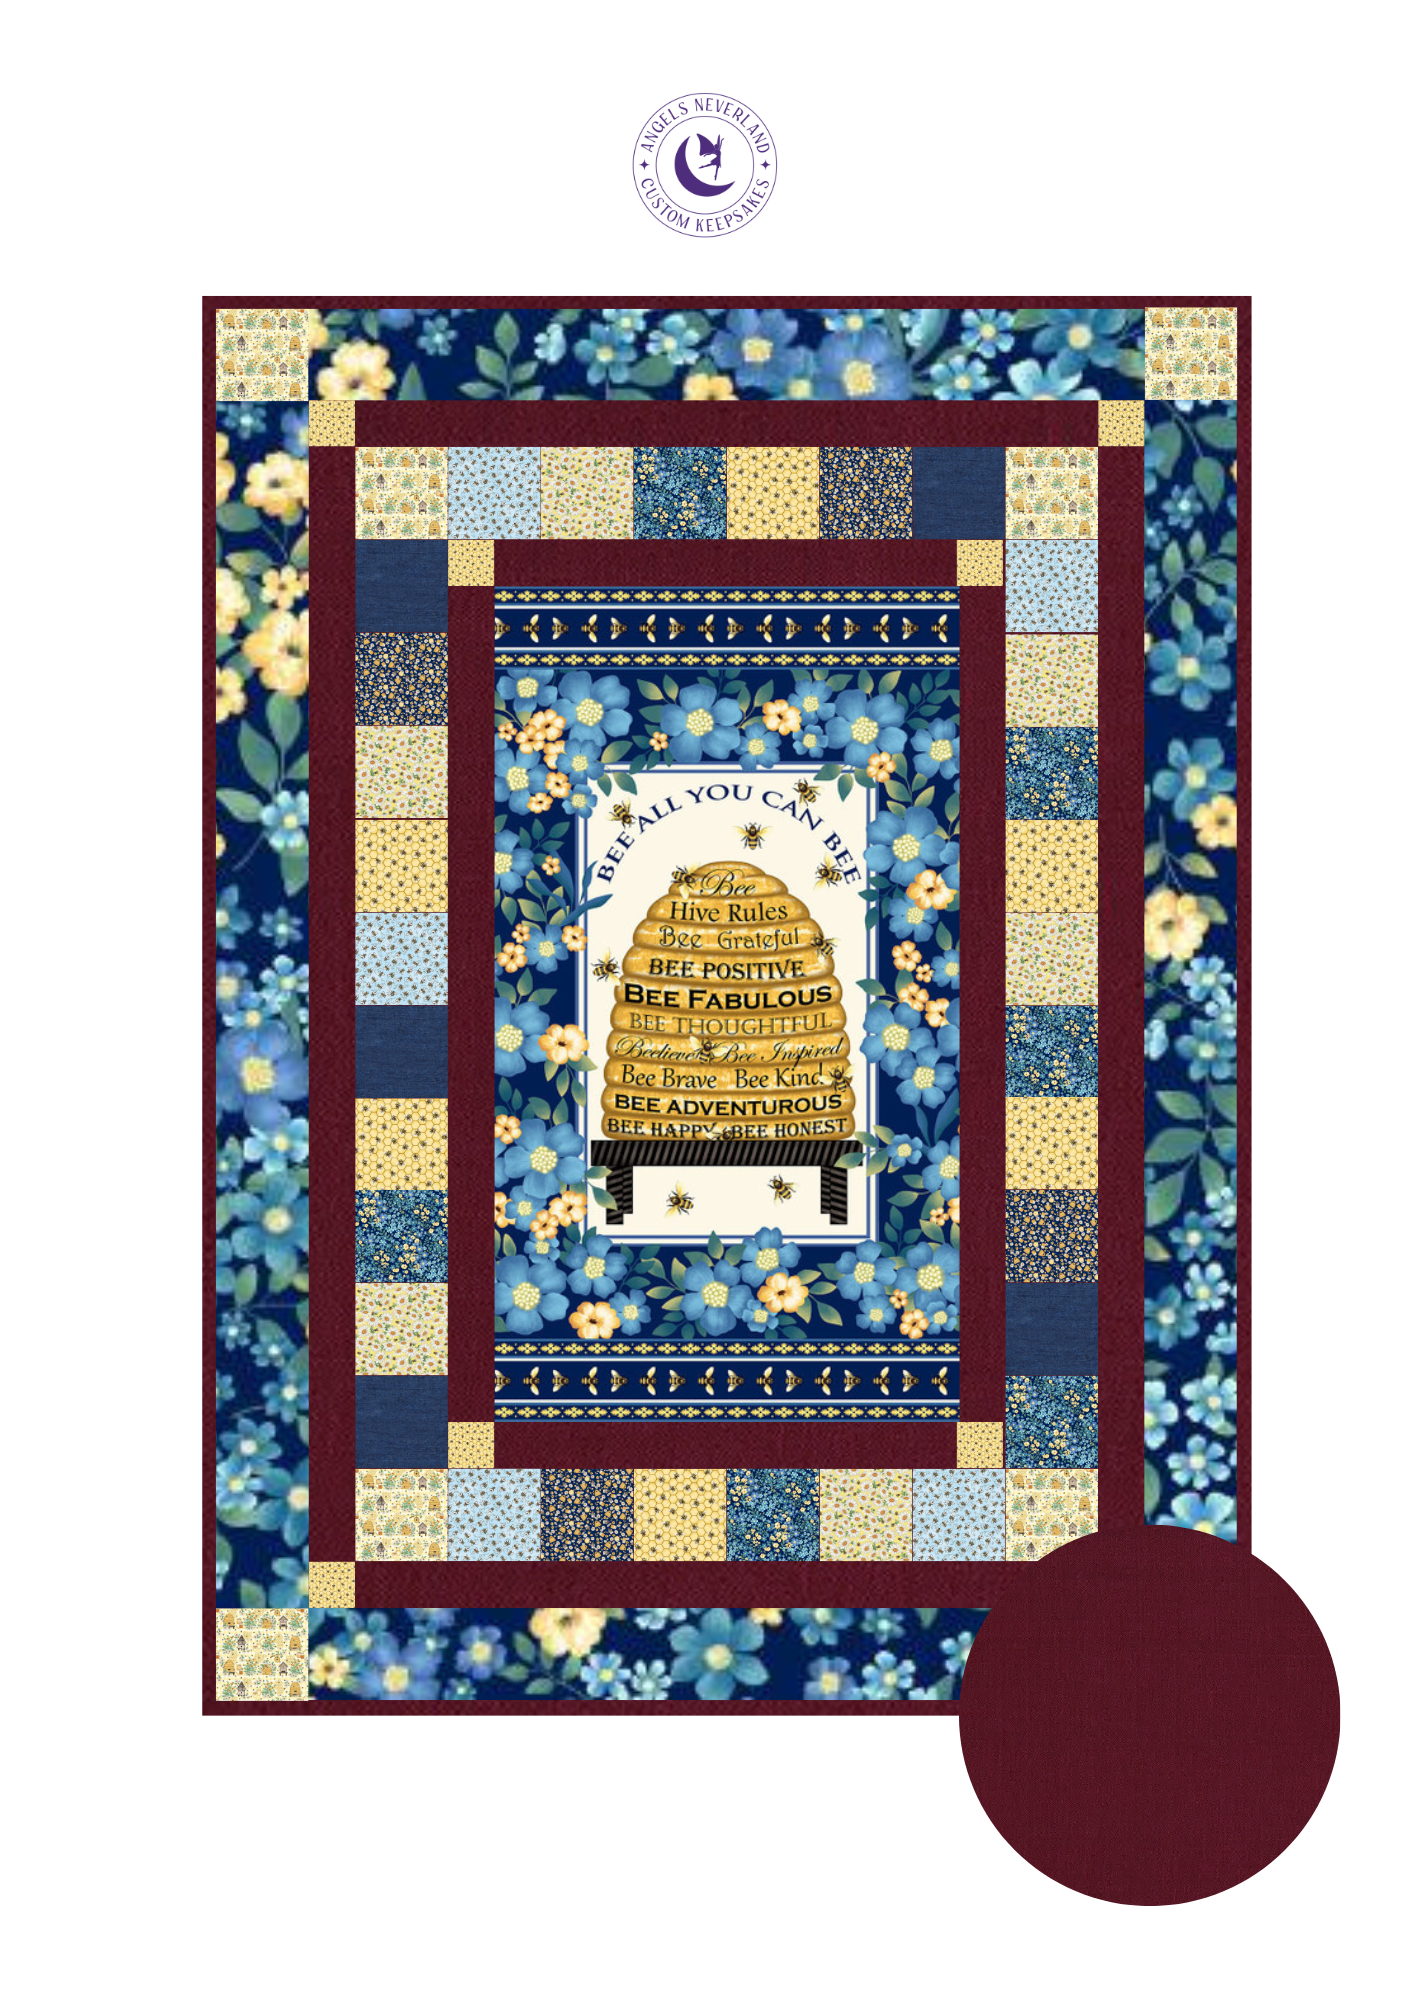 Studio E Quilt Kit Kit w/backing Merlot Beginner Quilt Kit Bee All You Can Bee DIY Panel Quilt 50" x 68" approximate finished size